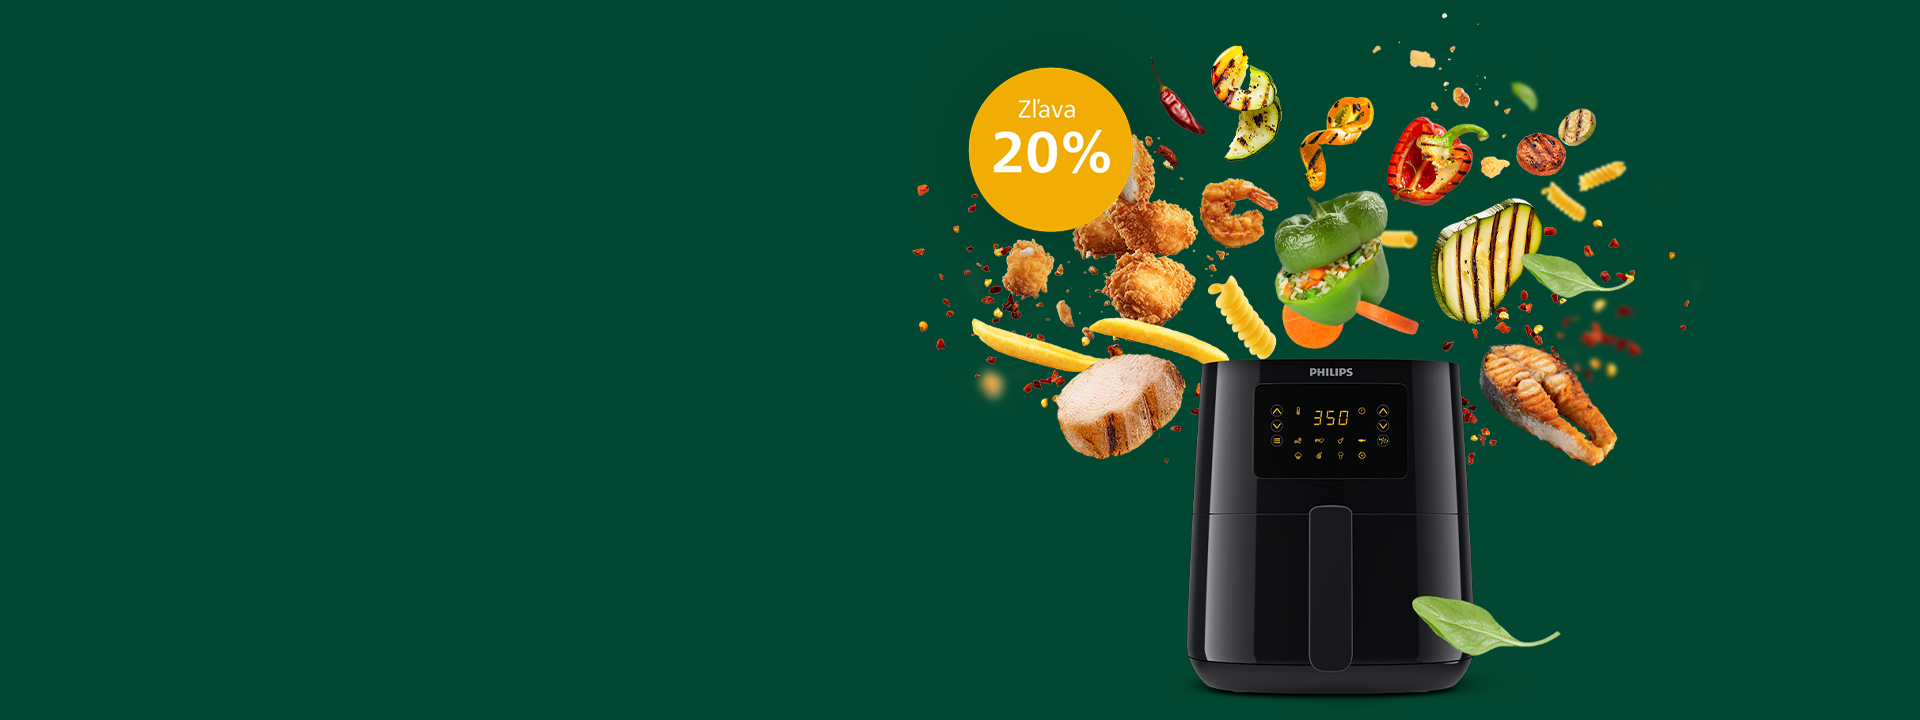 sk_SK_Airfryer_Banners_1920x720 (1)